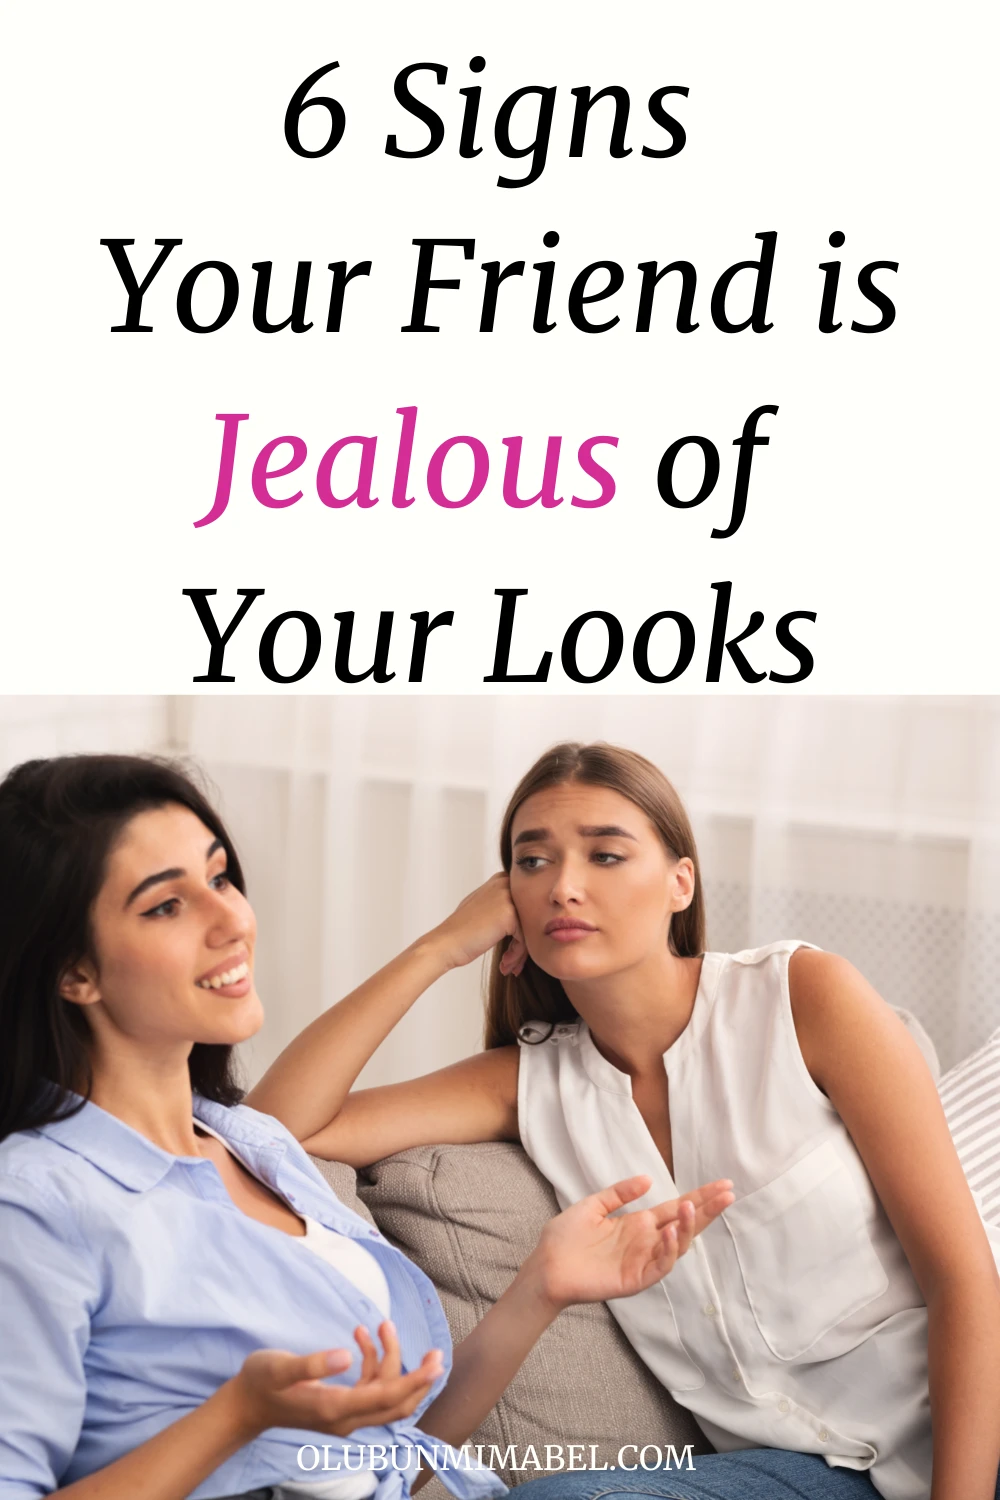 Signs Your Friend Is Jealous Of Your Looks